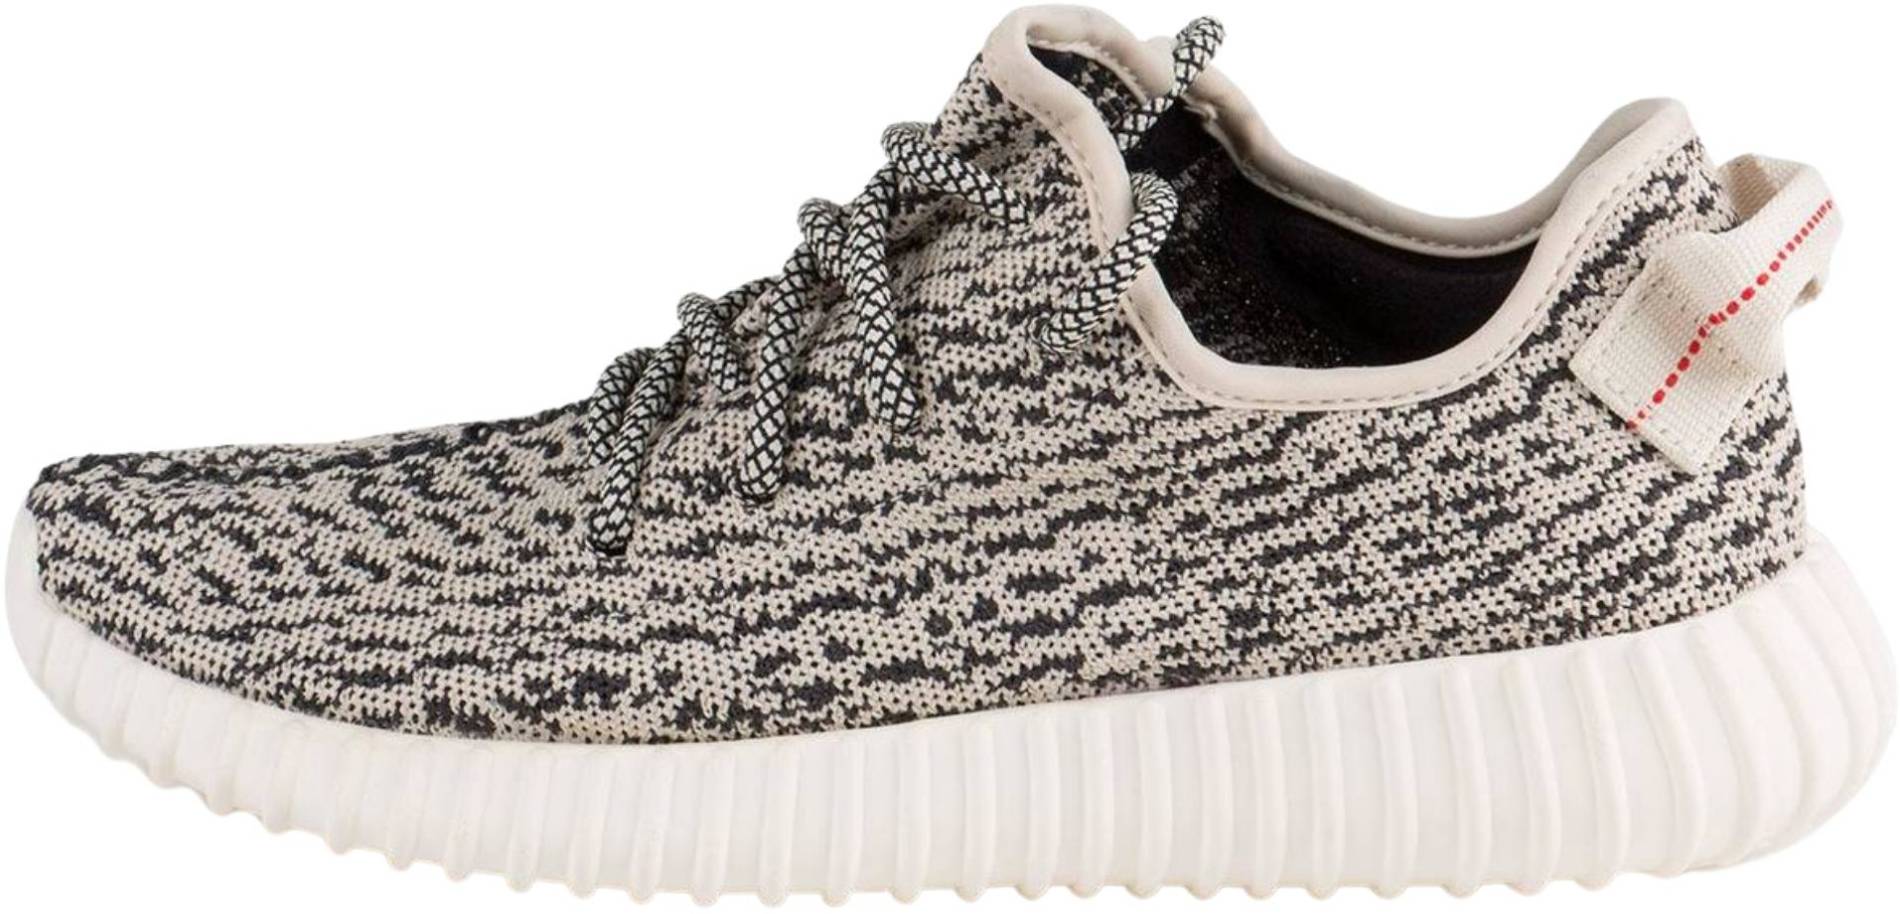 volatility thousand surplus Adidas Yeezy 350 Boost sneakers in 3 colors | RunRepeat